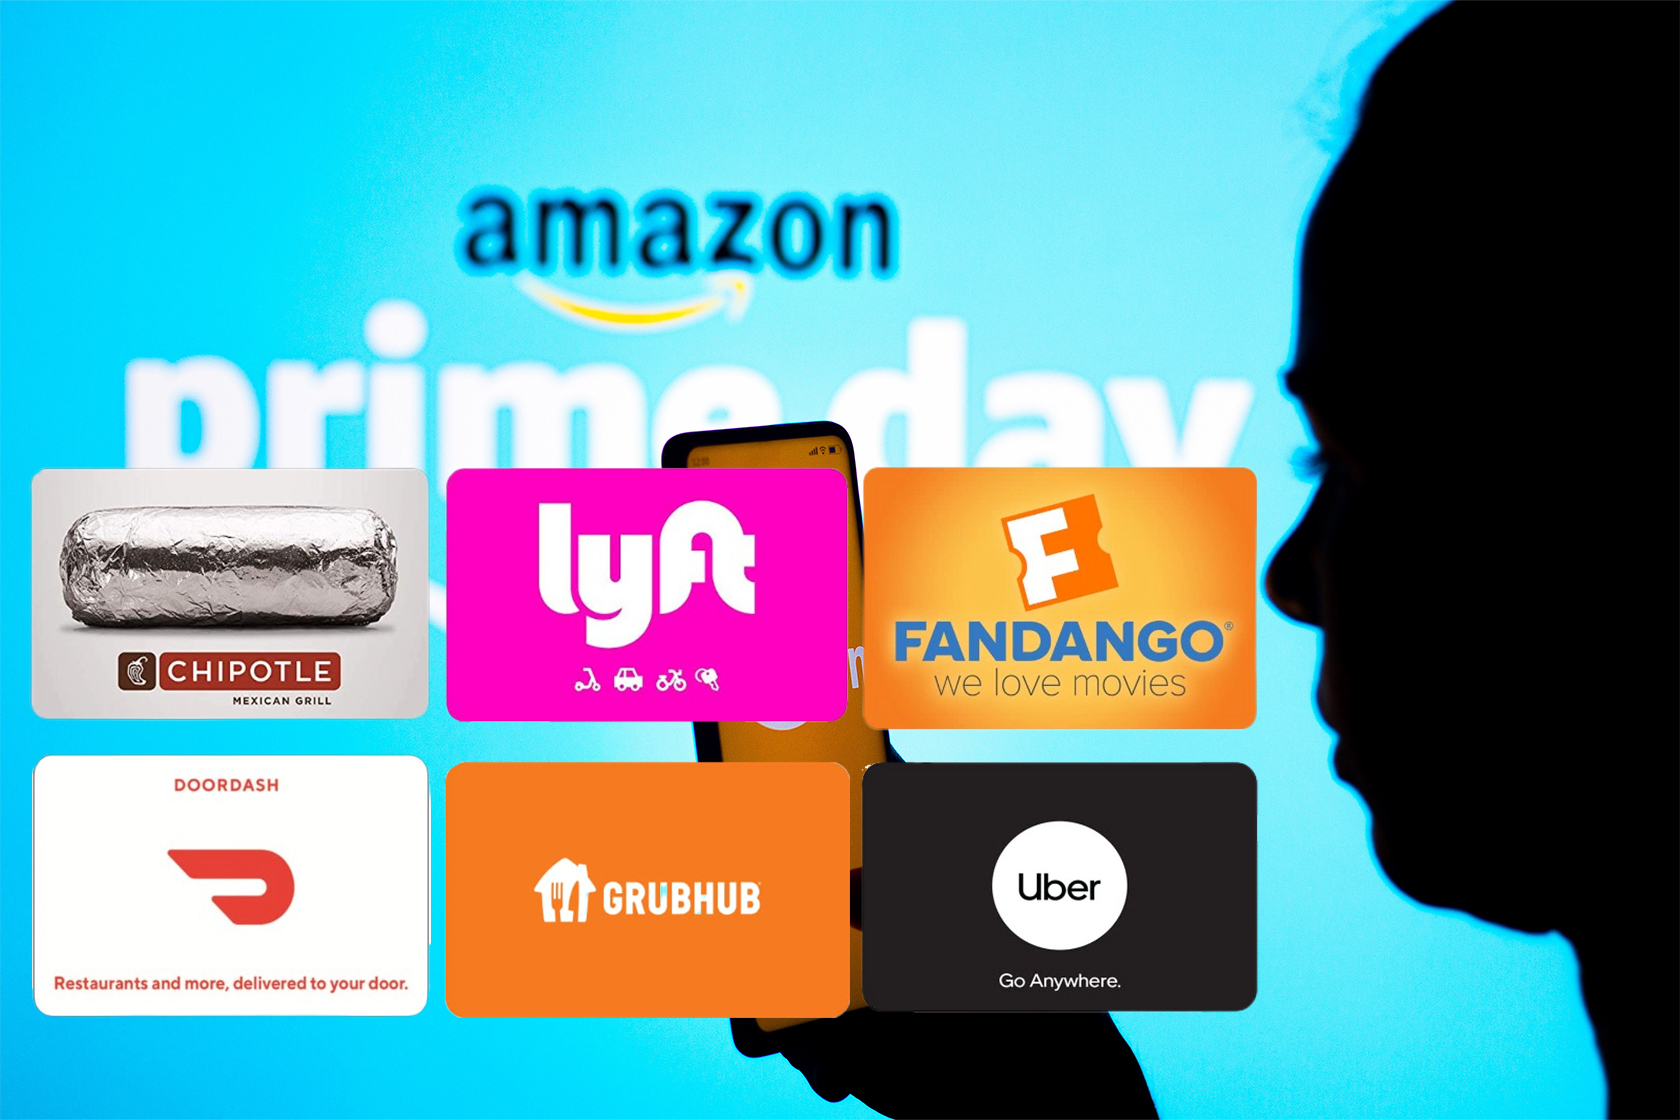 amazon gift card get promo codes giveaway | Amazon gift card free, Amazon  gift cards, Free gift cards online